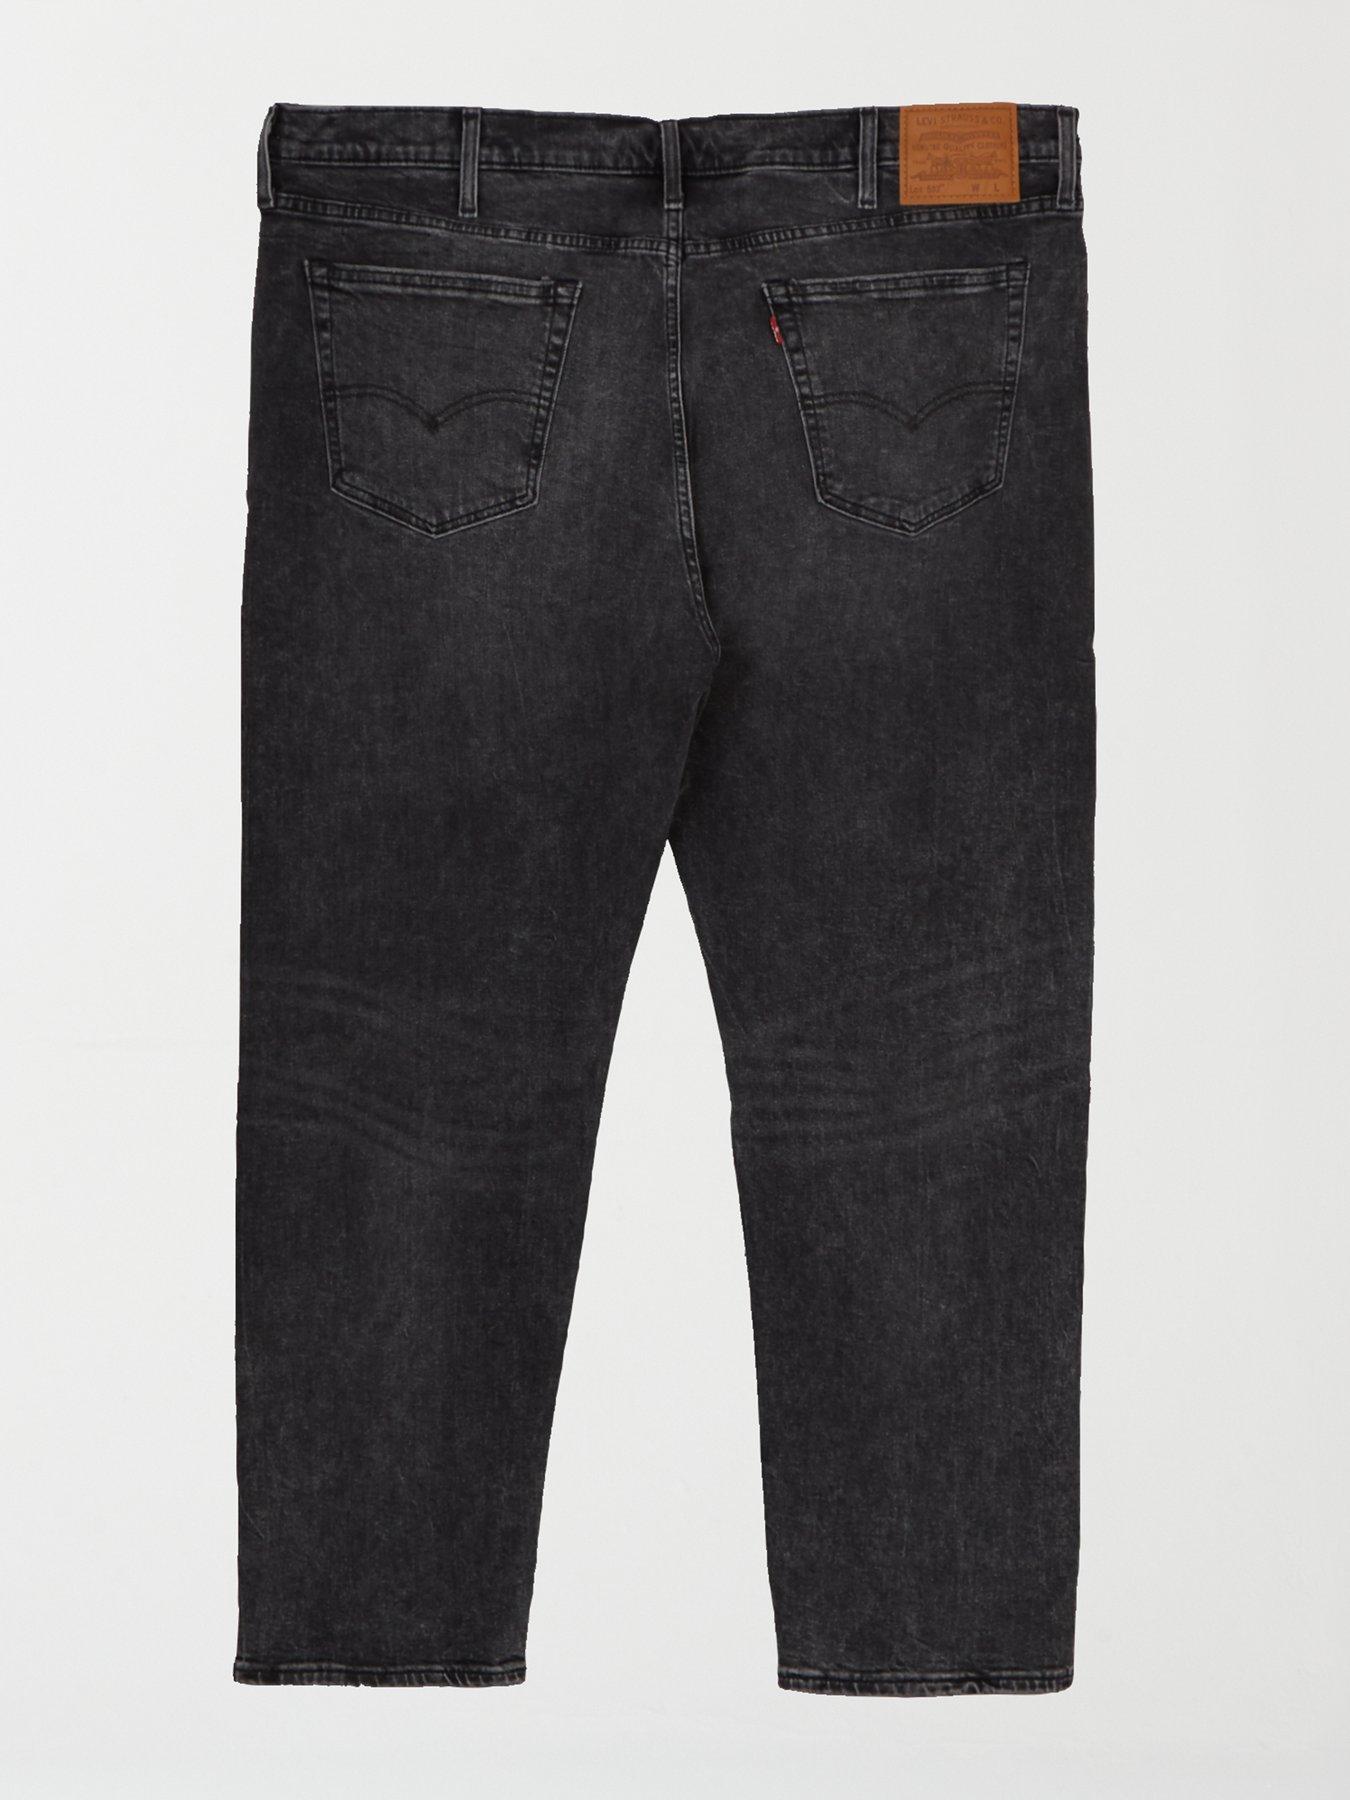 big and tall jeans uk